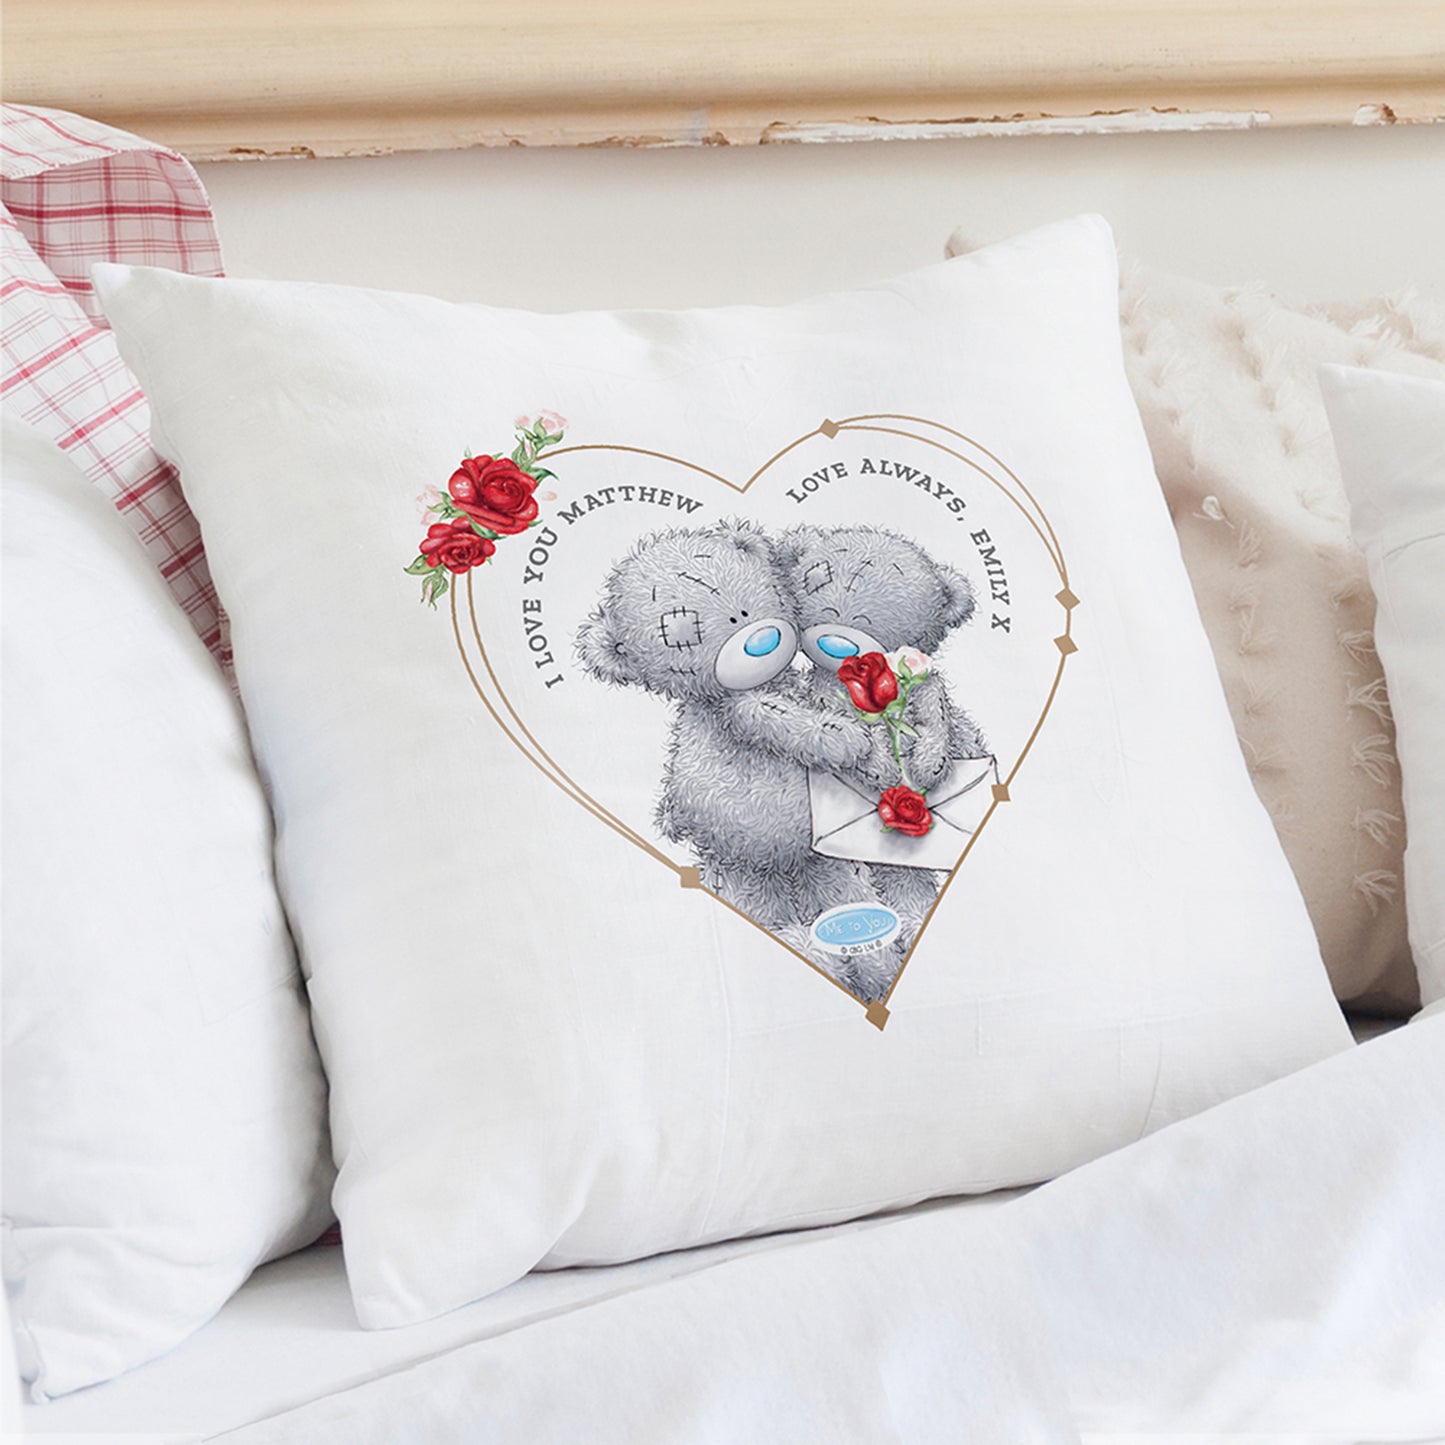 Personalised Me to You Valentine Cushion Cover - Personalise It!